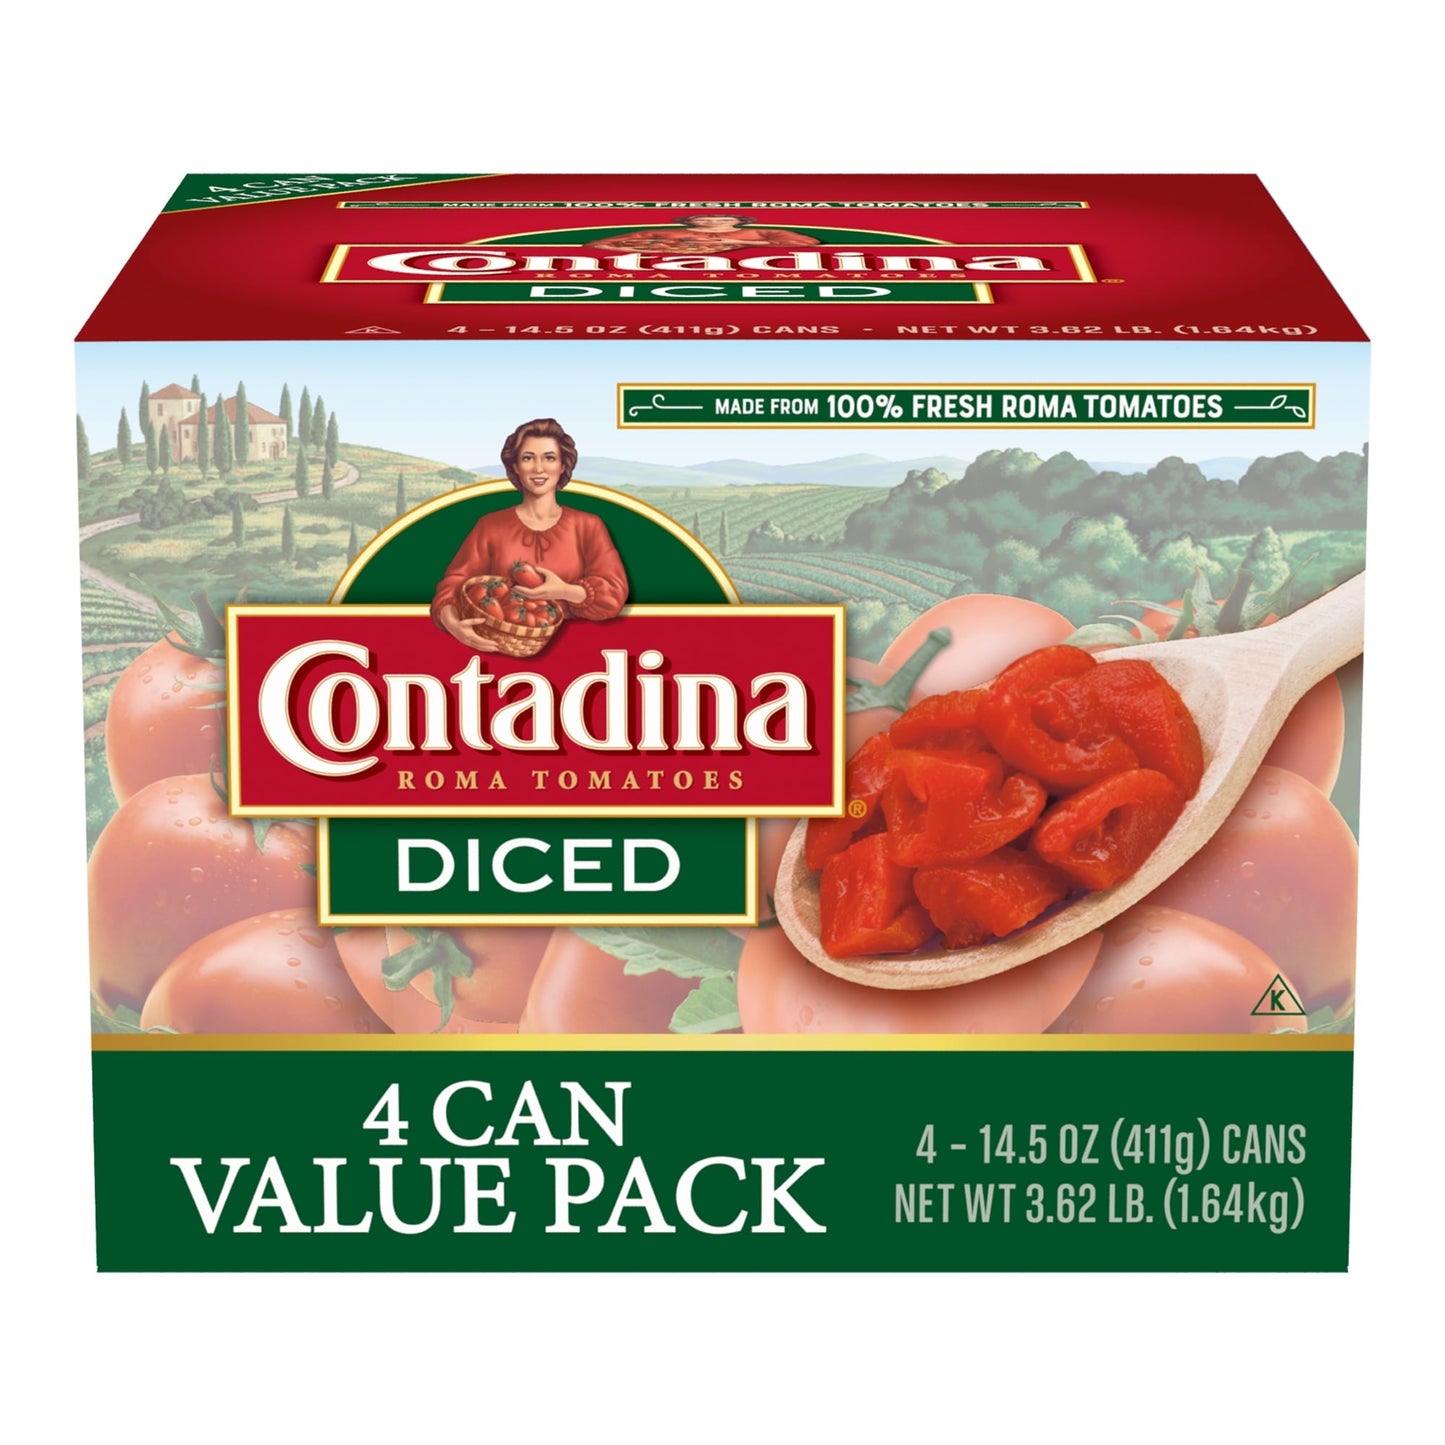 (4 Cans) Contadina Diced Tomatoes, 14.5 oz Cans